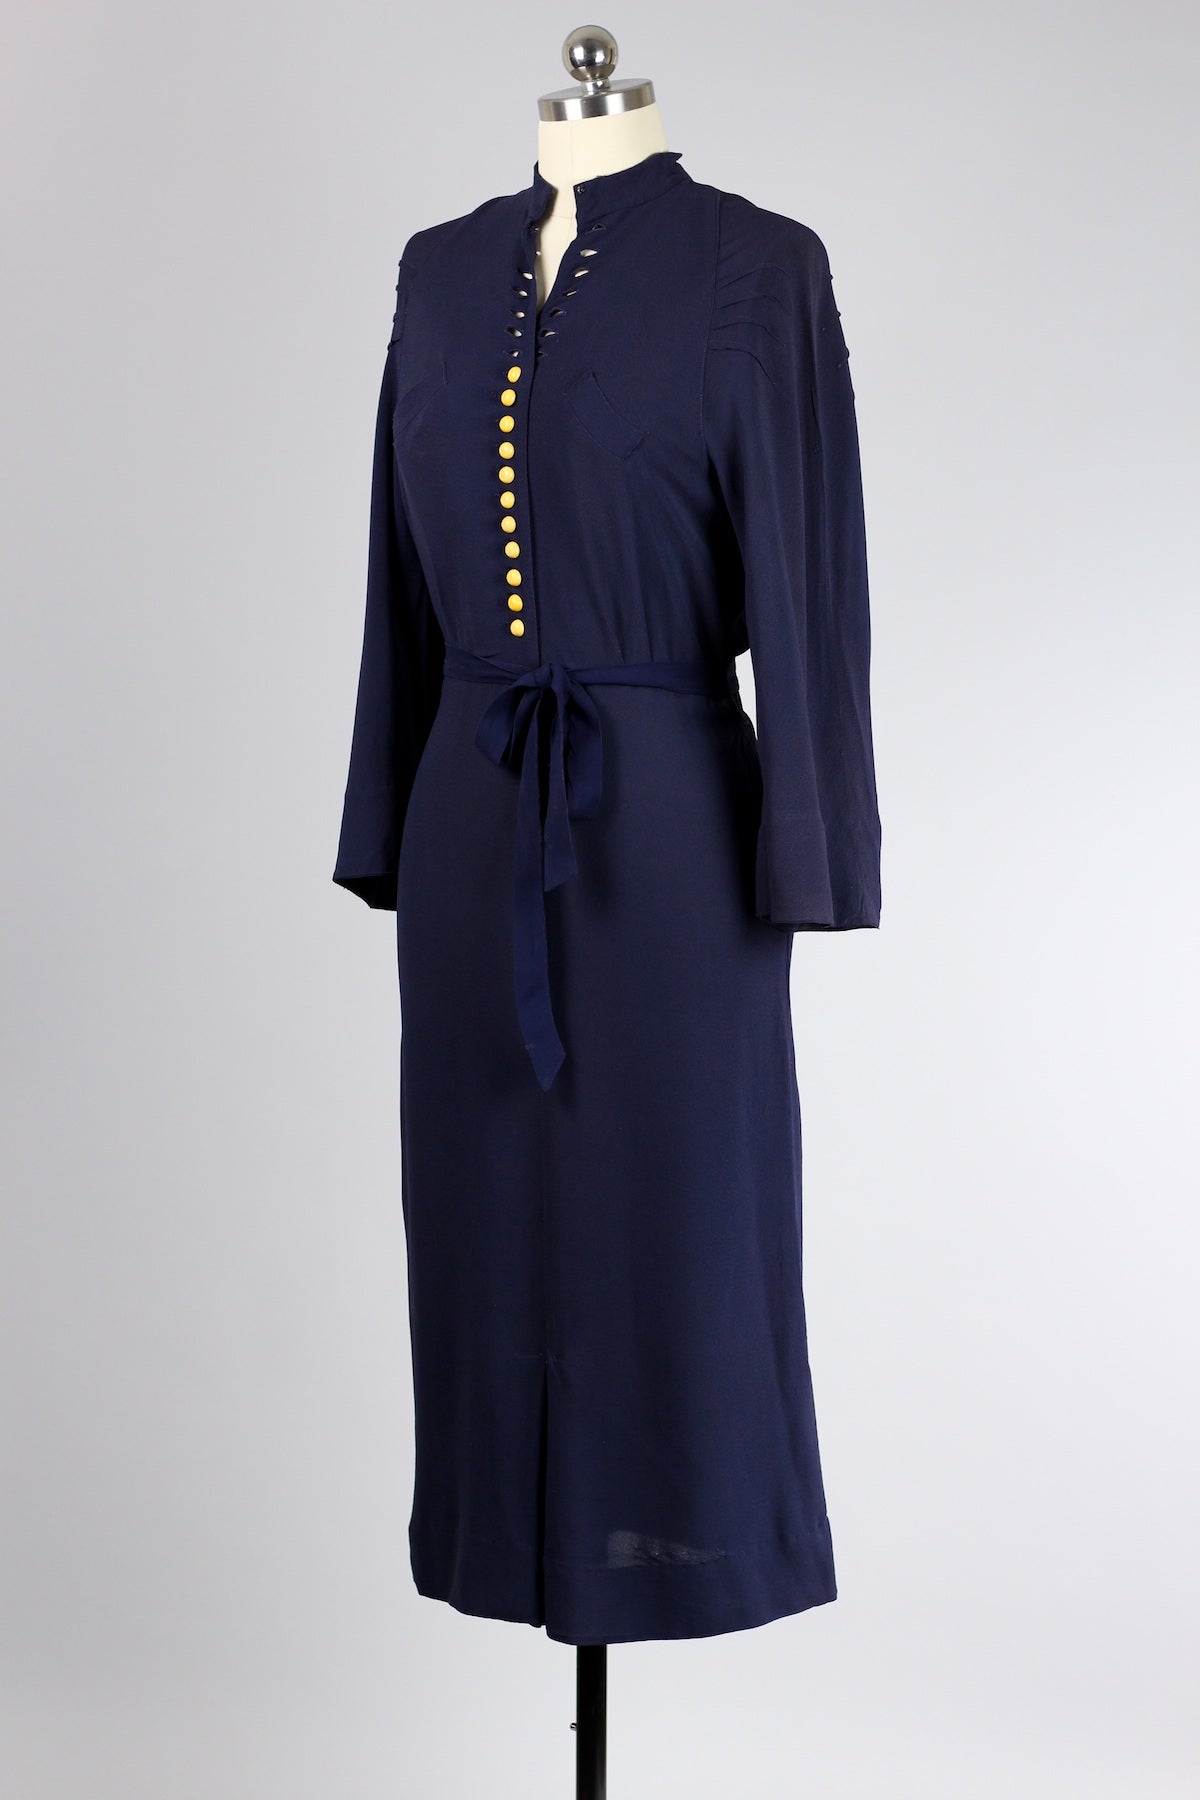 Rare 1930s-40s Navy Crepe Dress with Yellow Bakelite Buttons